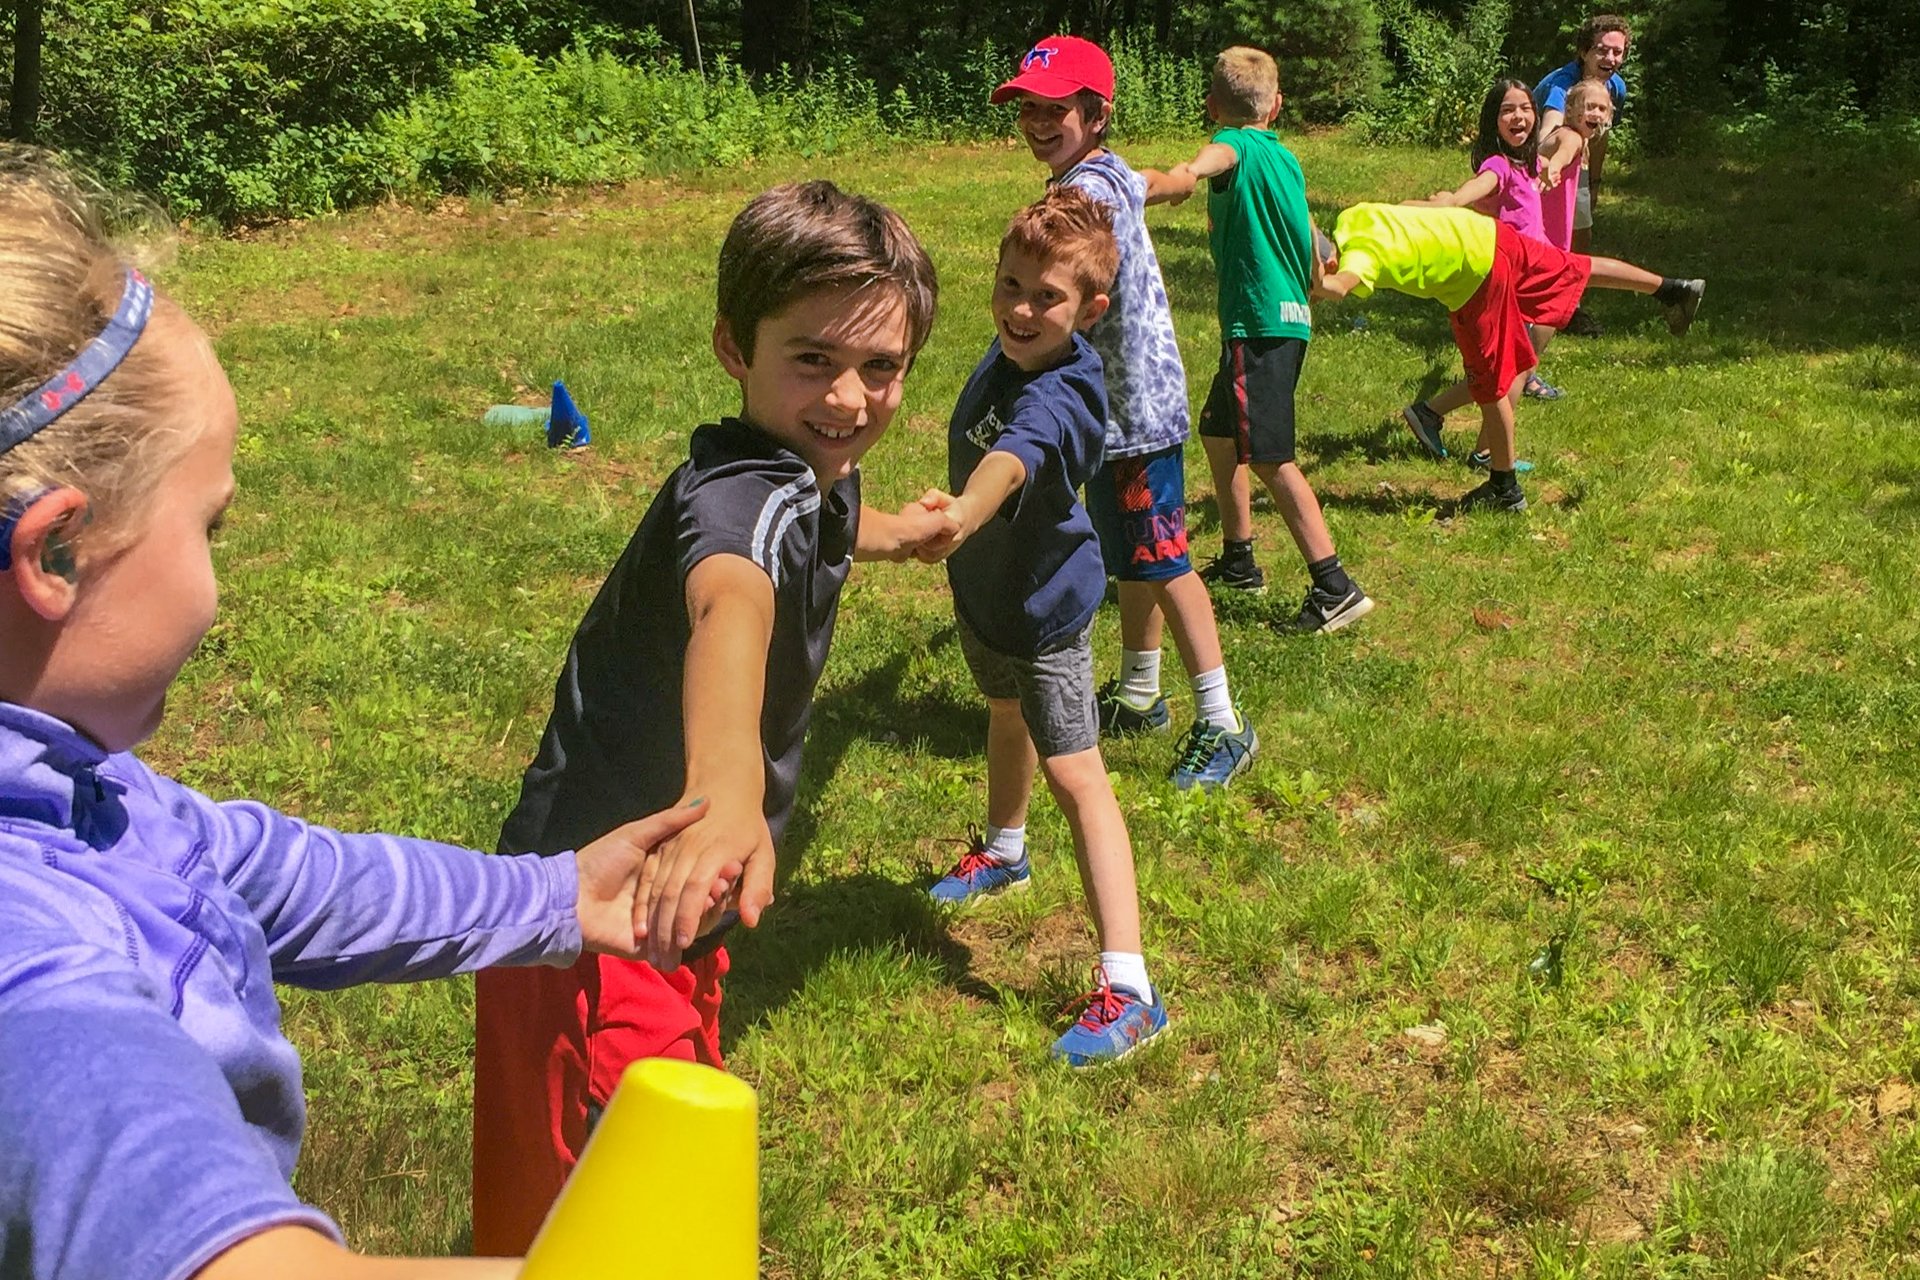 Campers at Broadmoor Nature Camp playing a game in the grass, smiling and holding hands in a line that stretches away from the camera